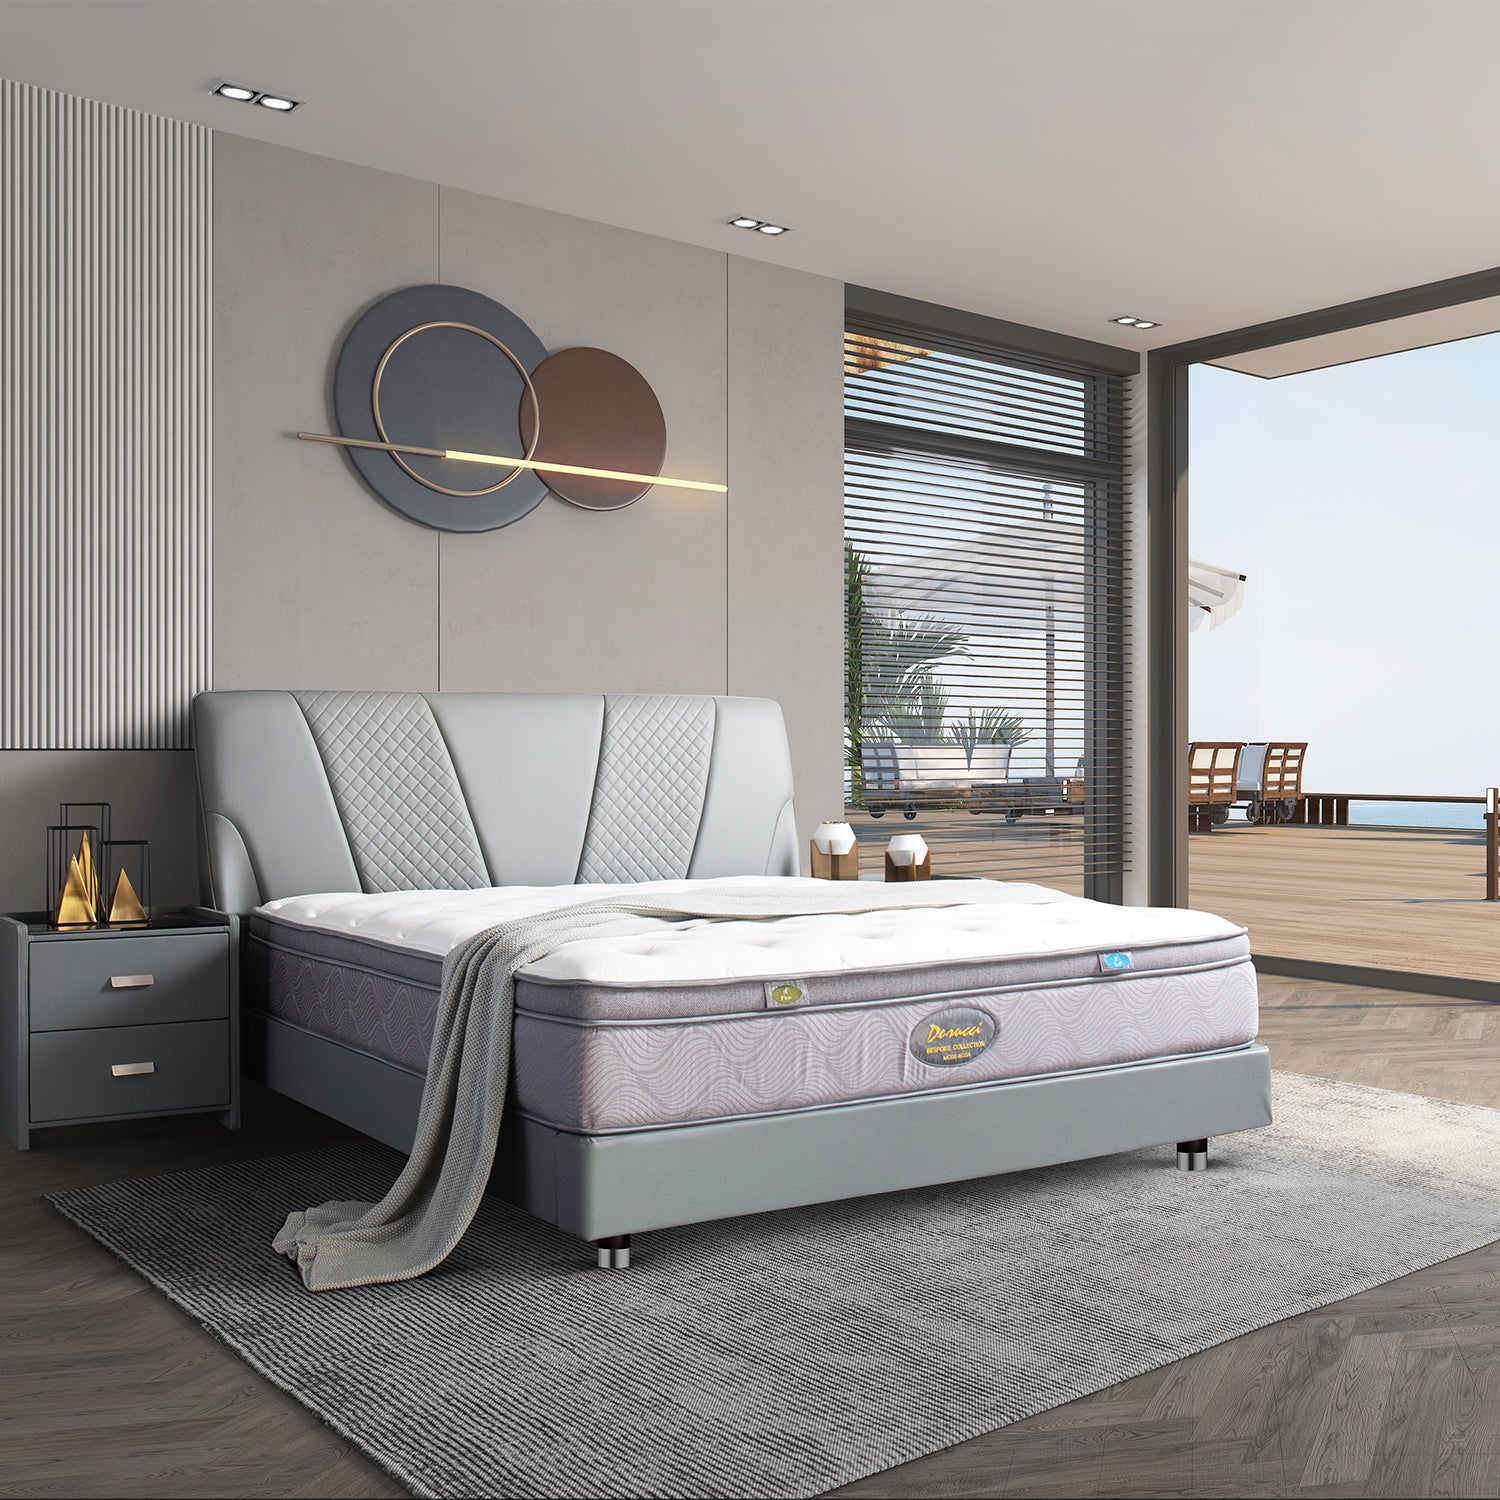 Stylish bedroom with gray upholstered bed frame and comfortable mattress in a modern setting overlooking a patio and ocean, featuring contemporary wall art and nightstand.